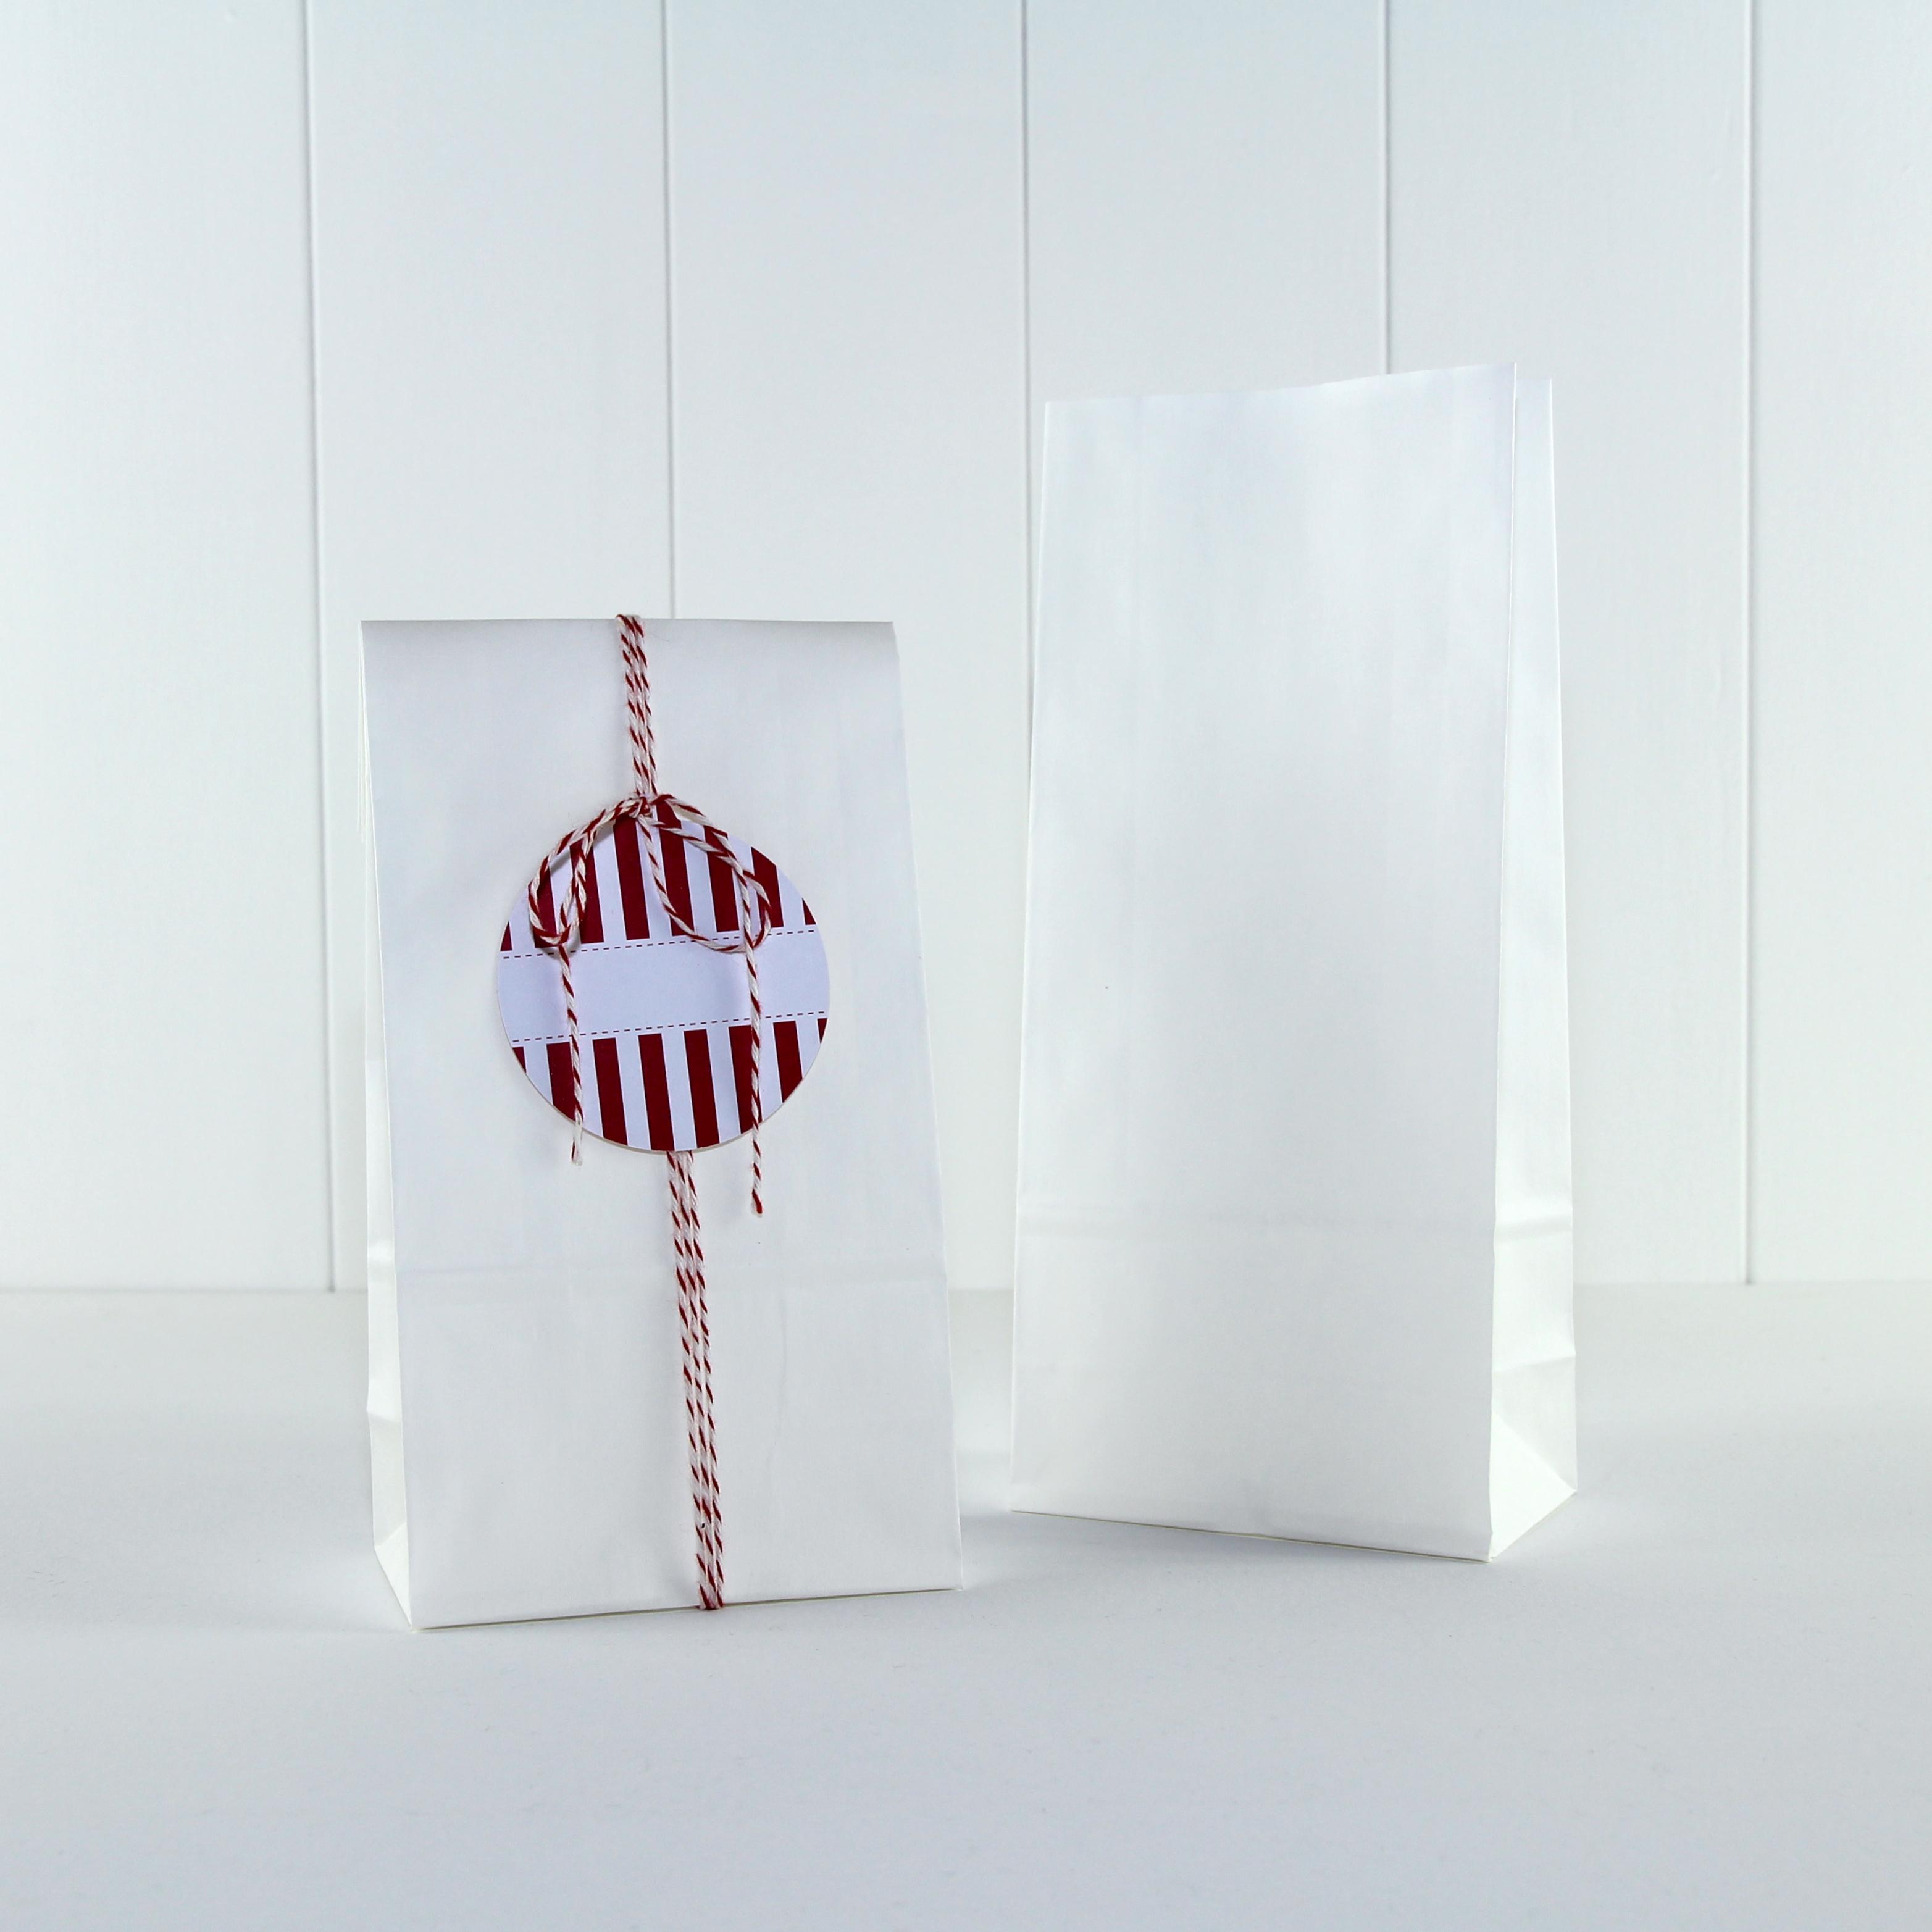 Paper Party Bag ~ White